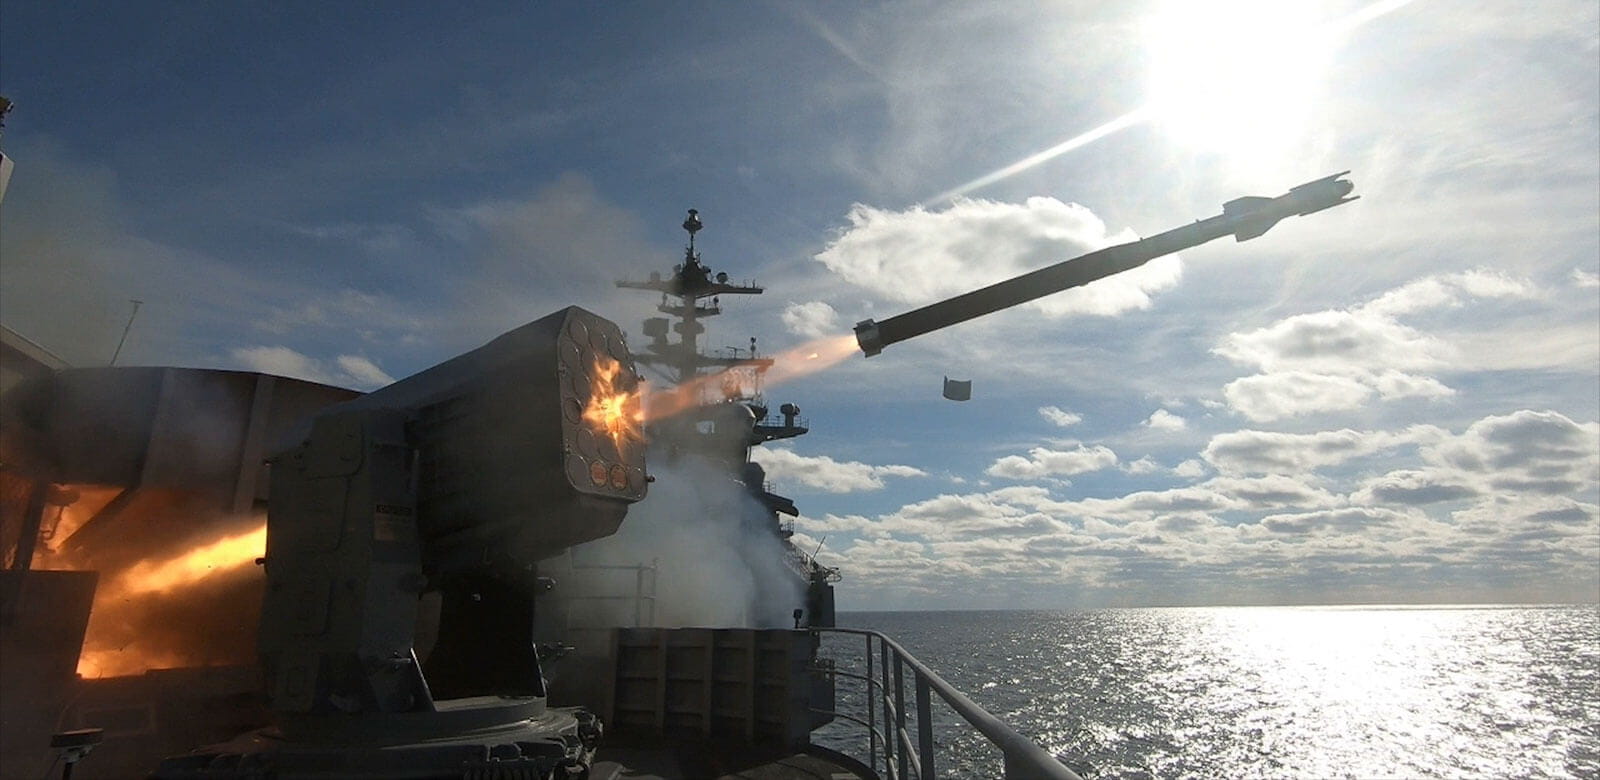 RAM Missile being shot from ship